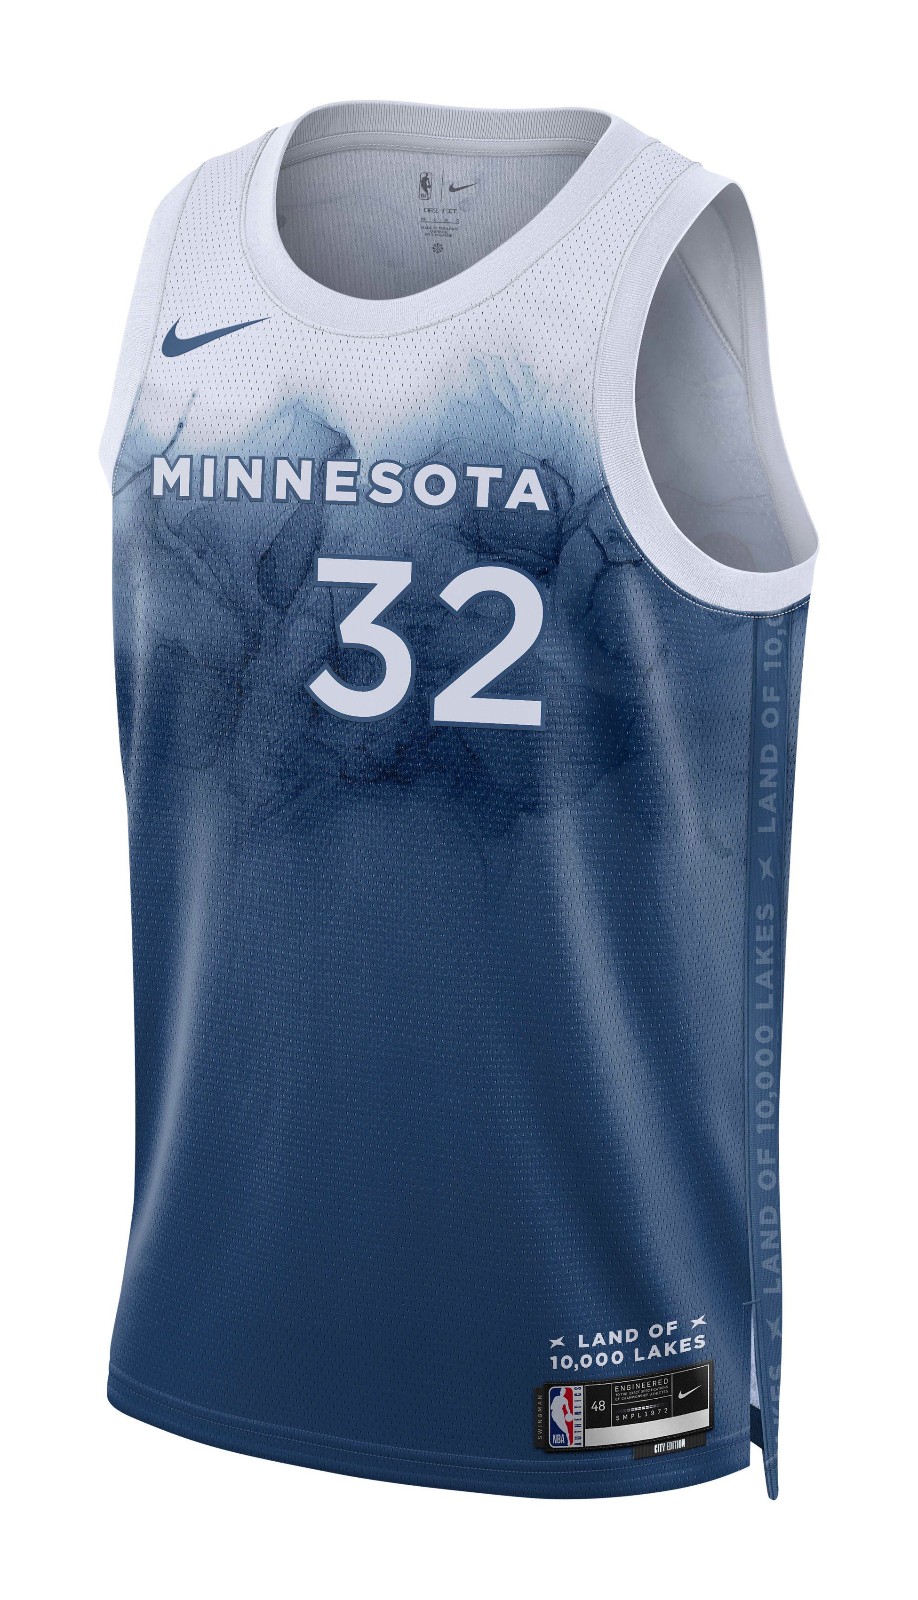 The Timberwolves unveiled their 2023-24 City Edition jerseys